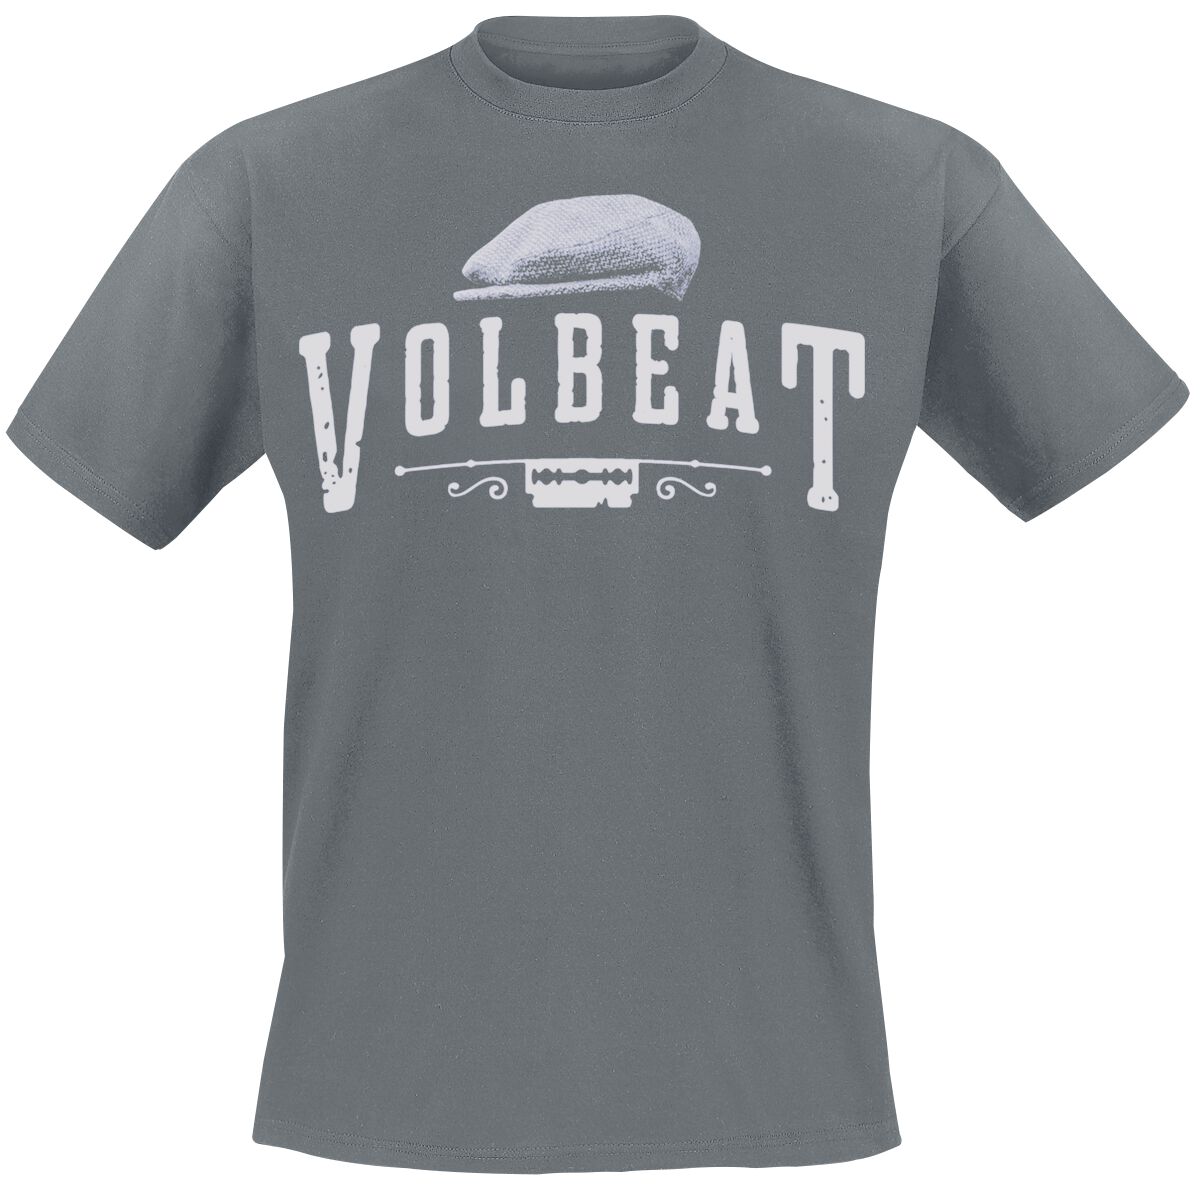 Volbeat Sixpence - Rewind, Replay, Rebound T-Shirt charcoal in XXL